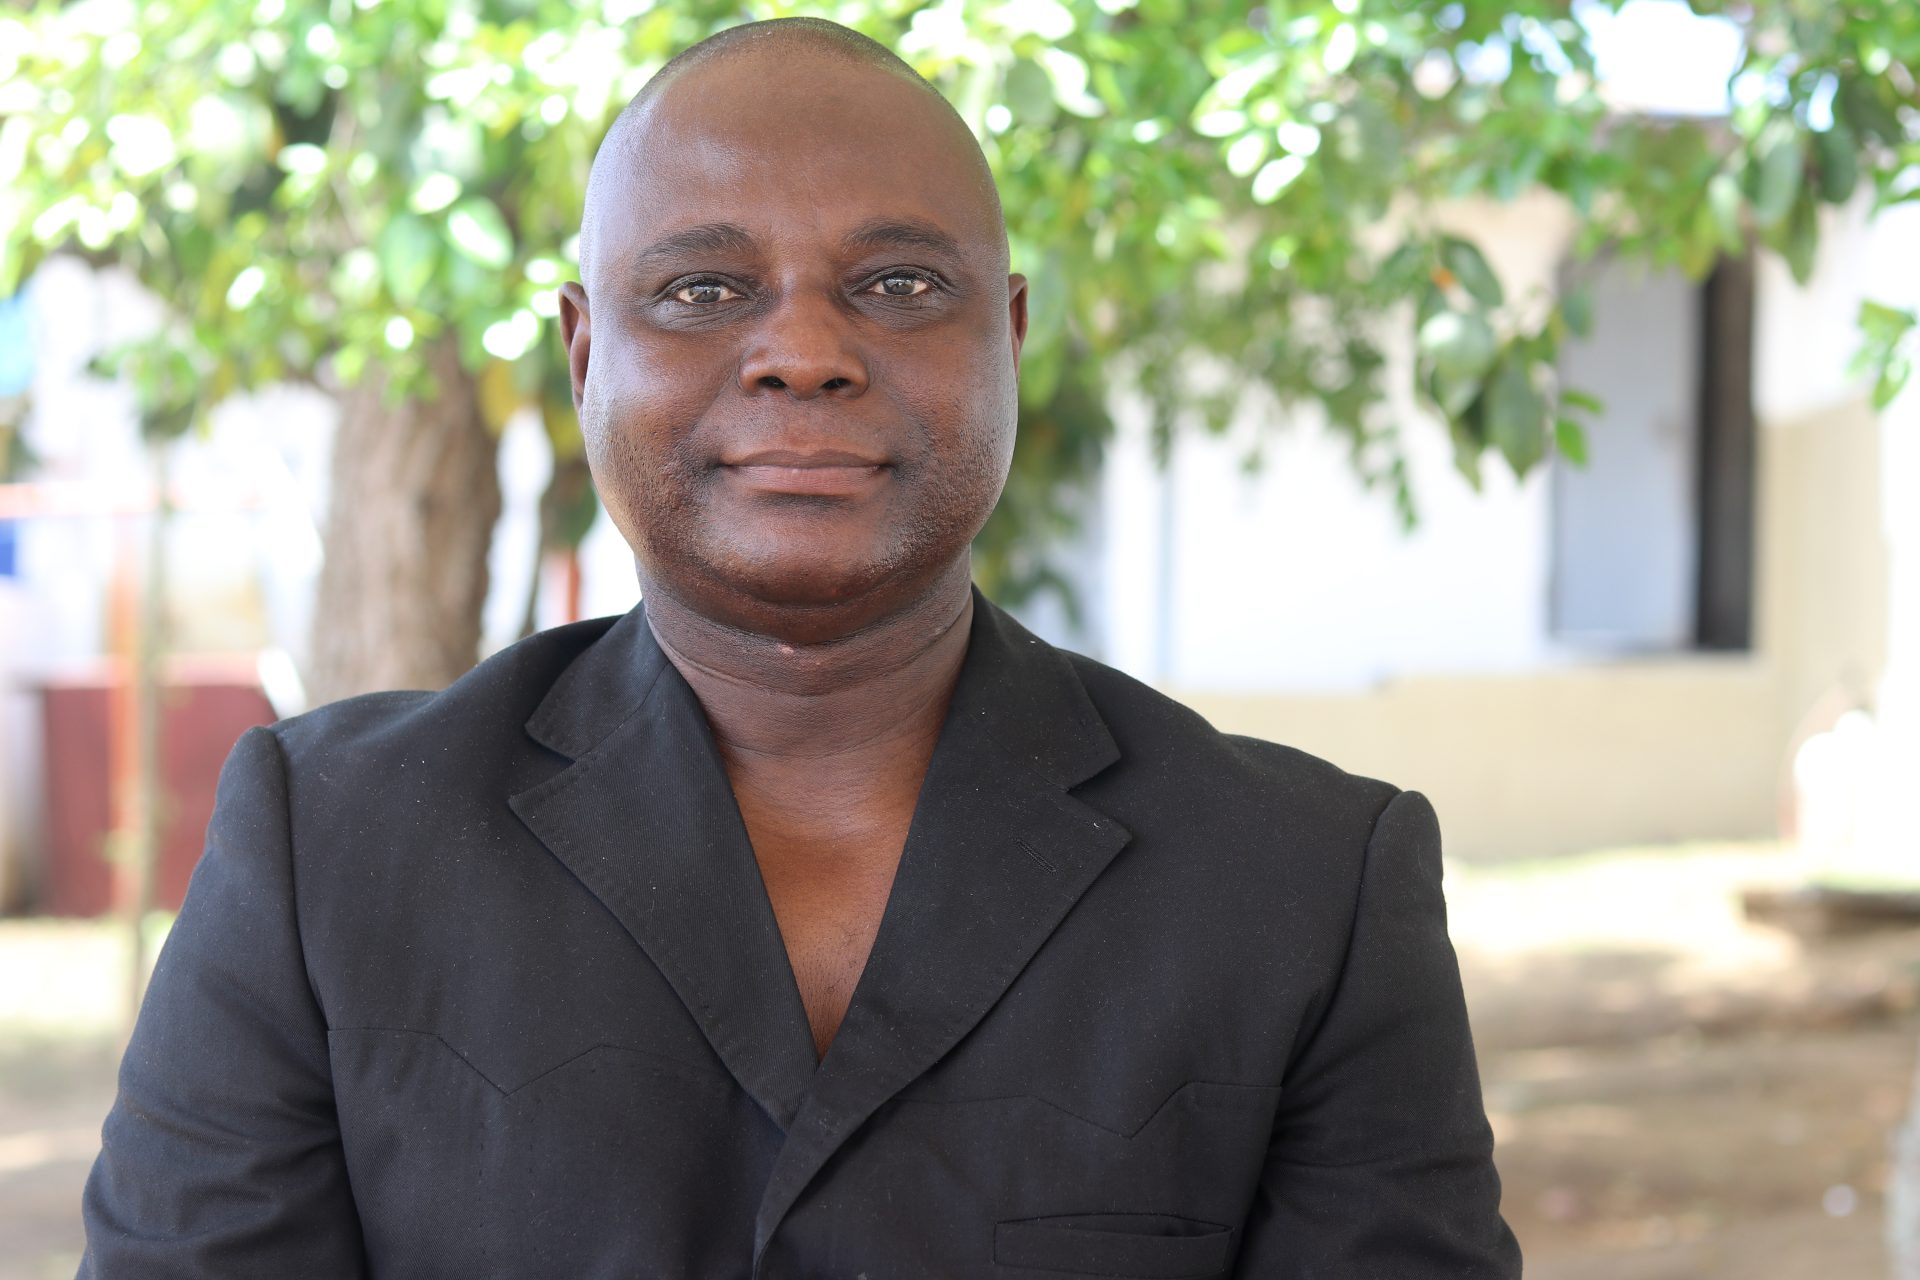 Q&A with Augustine Allieu, National Director of SOS Children’s Villages Liberia